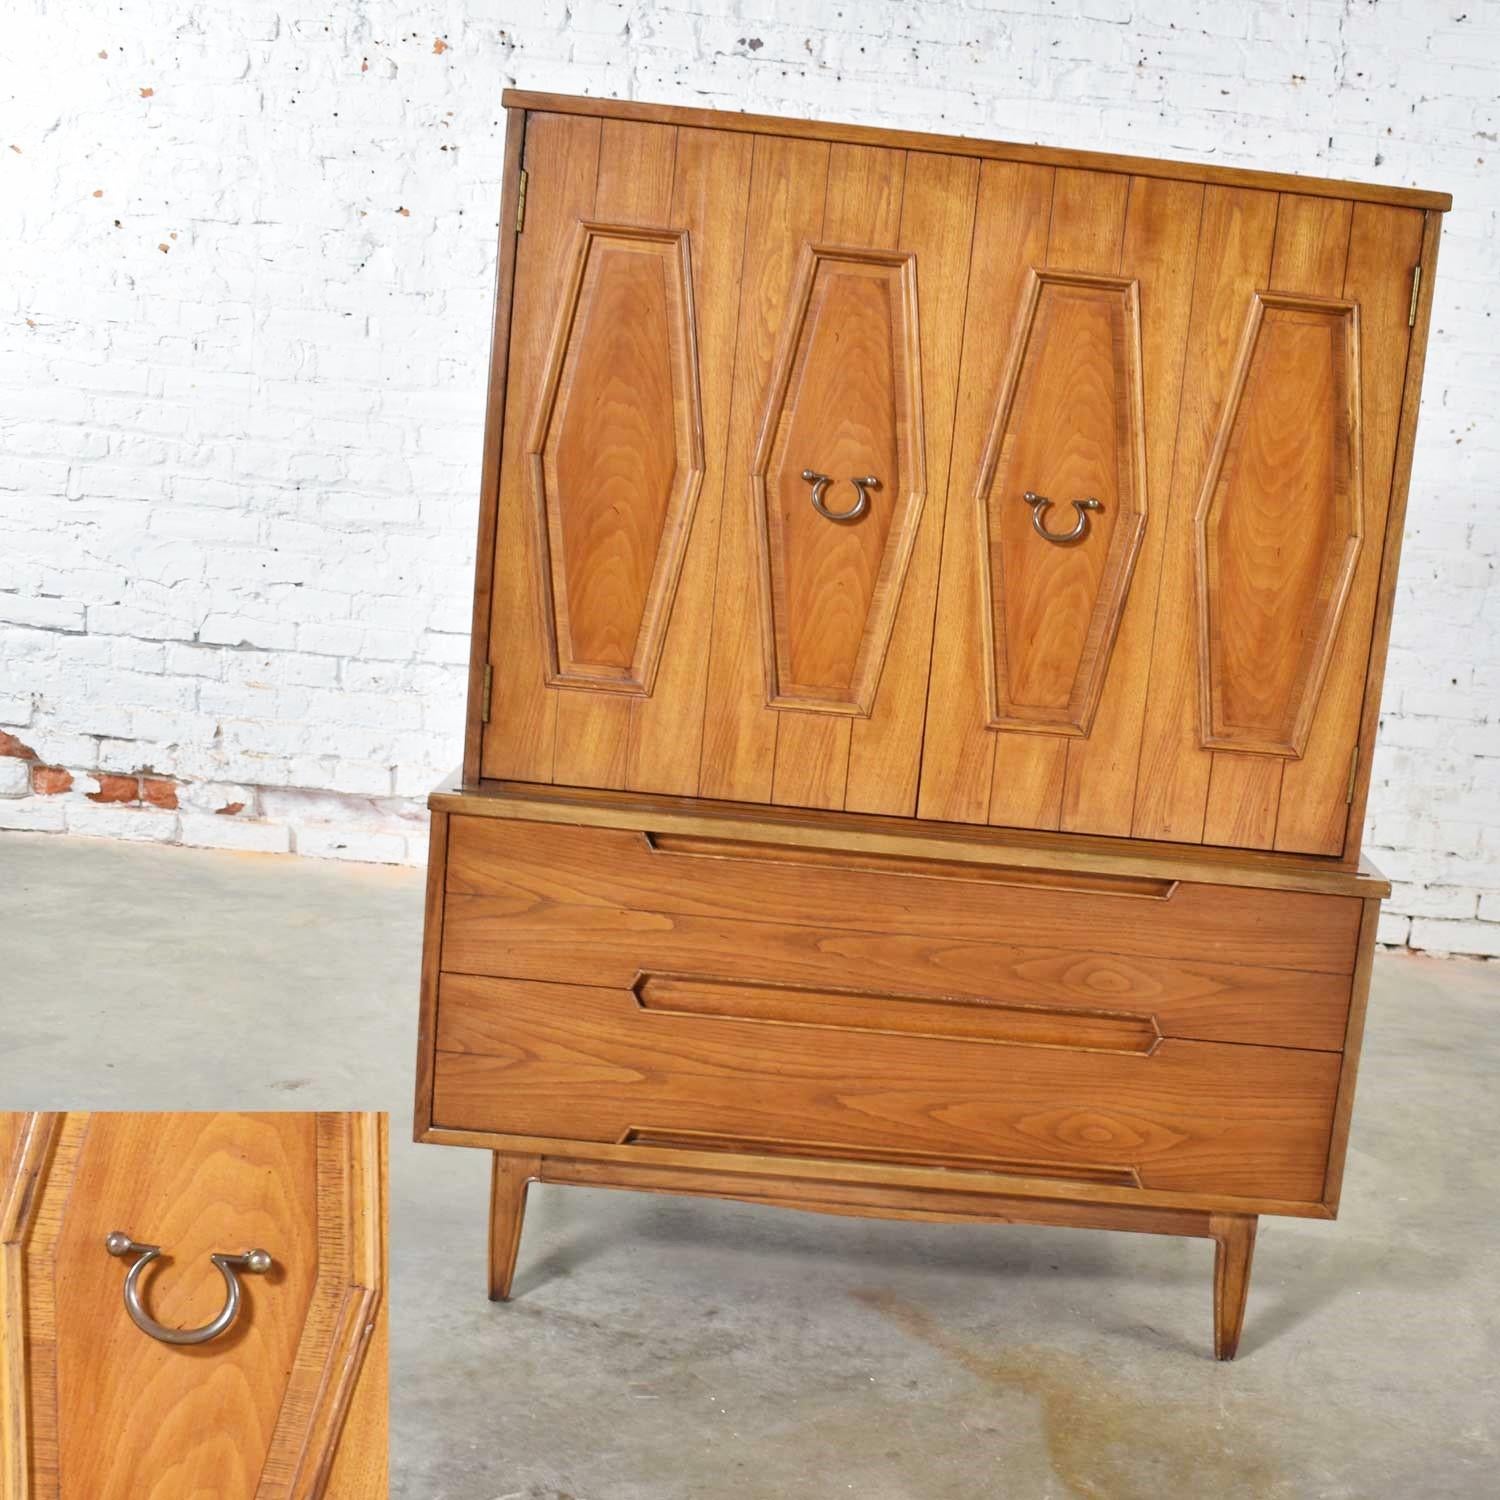 Midcentury Gentlemen’s Chest with Hexagon Paneled Design and Brass Hardware For Sale 3